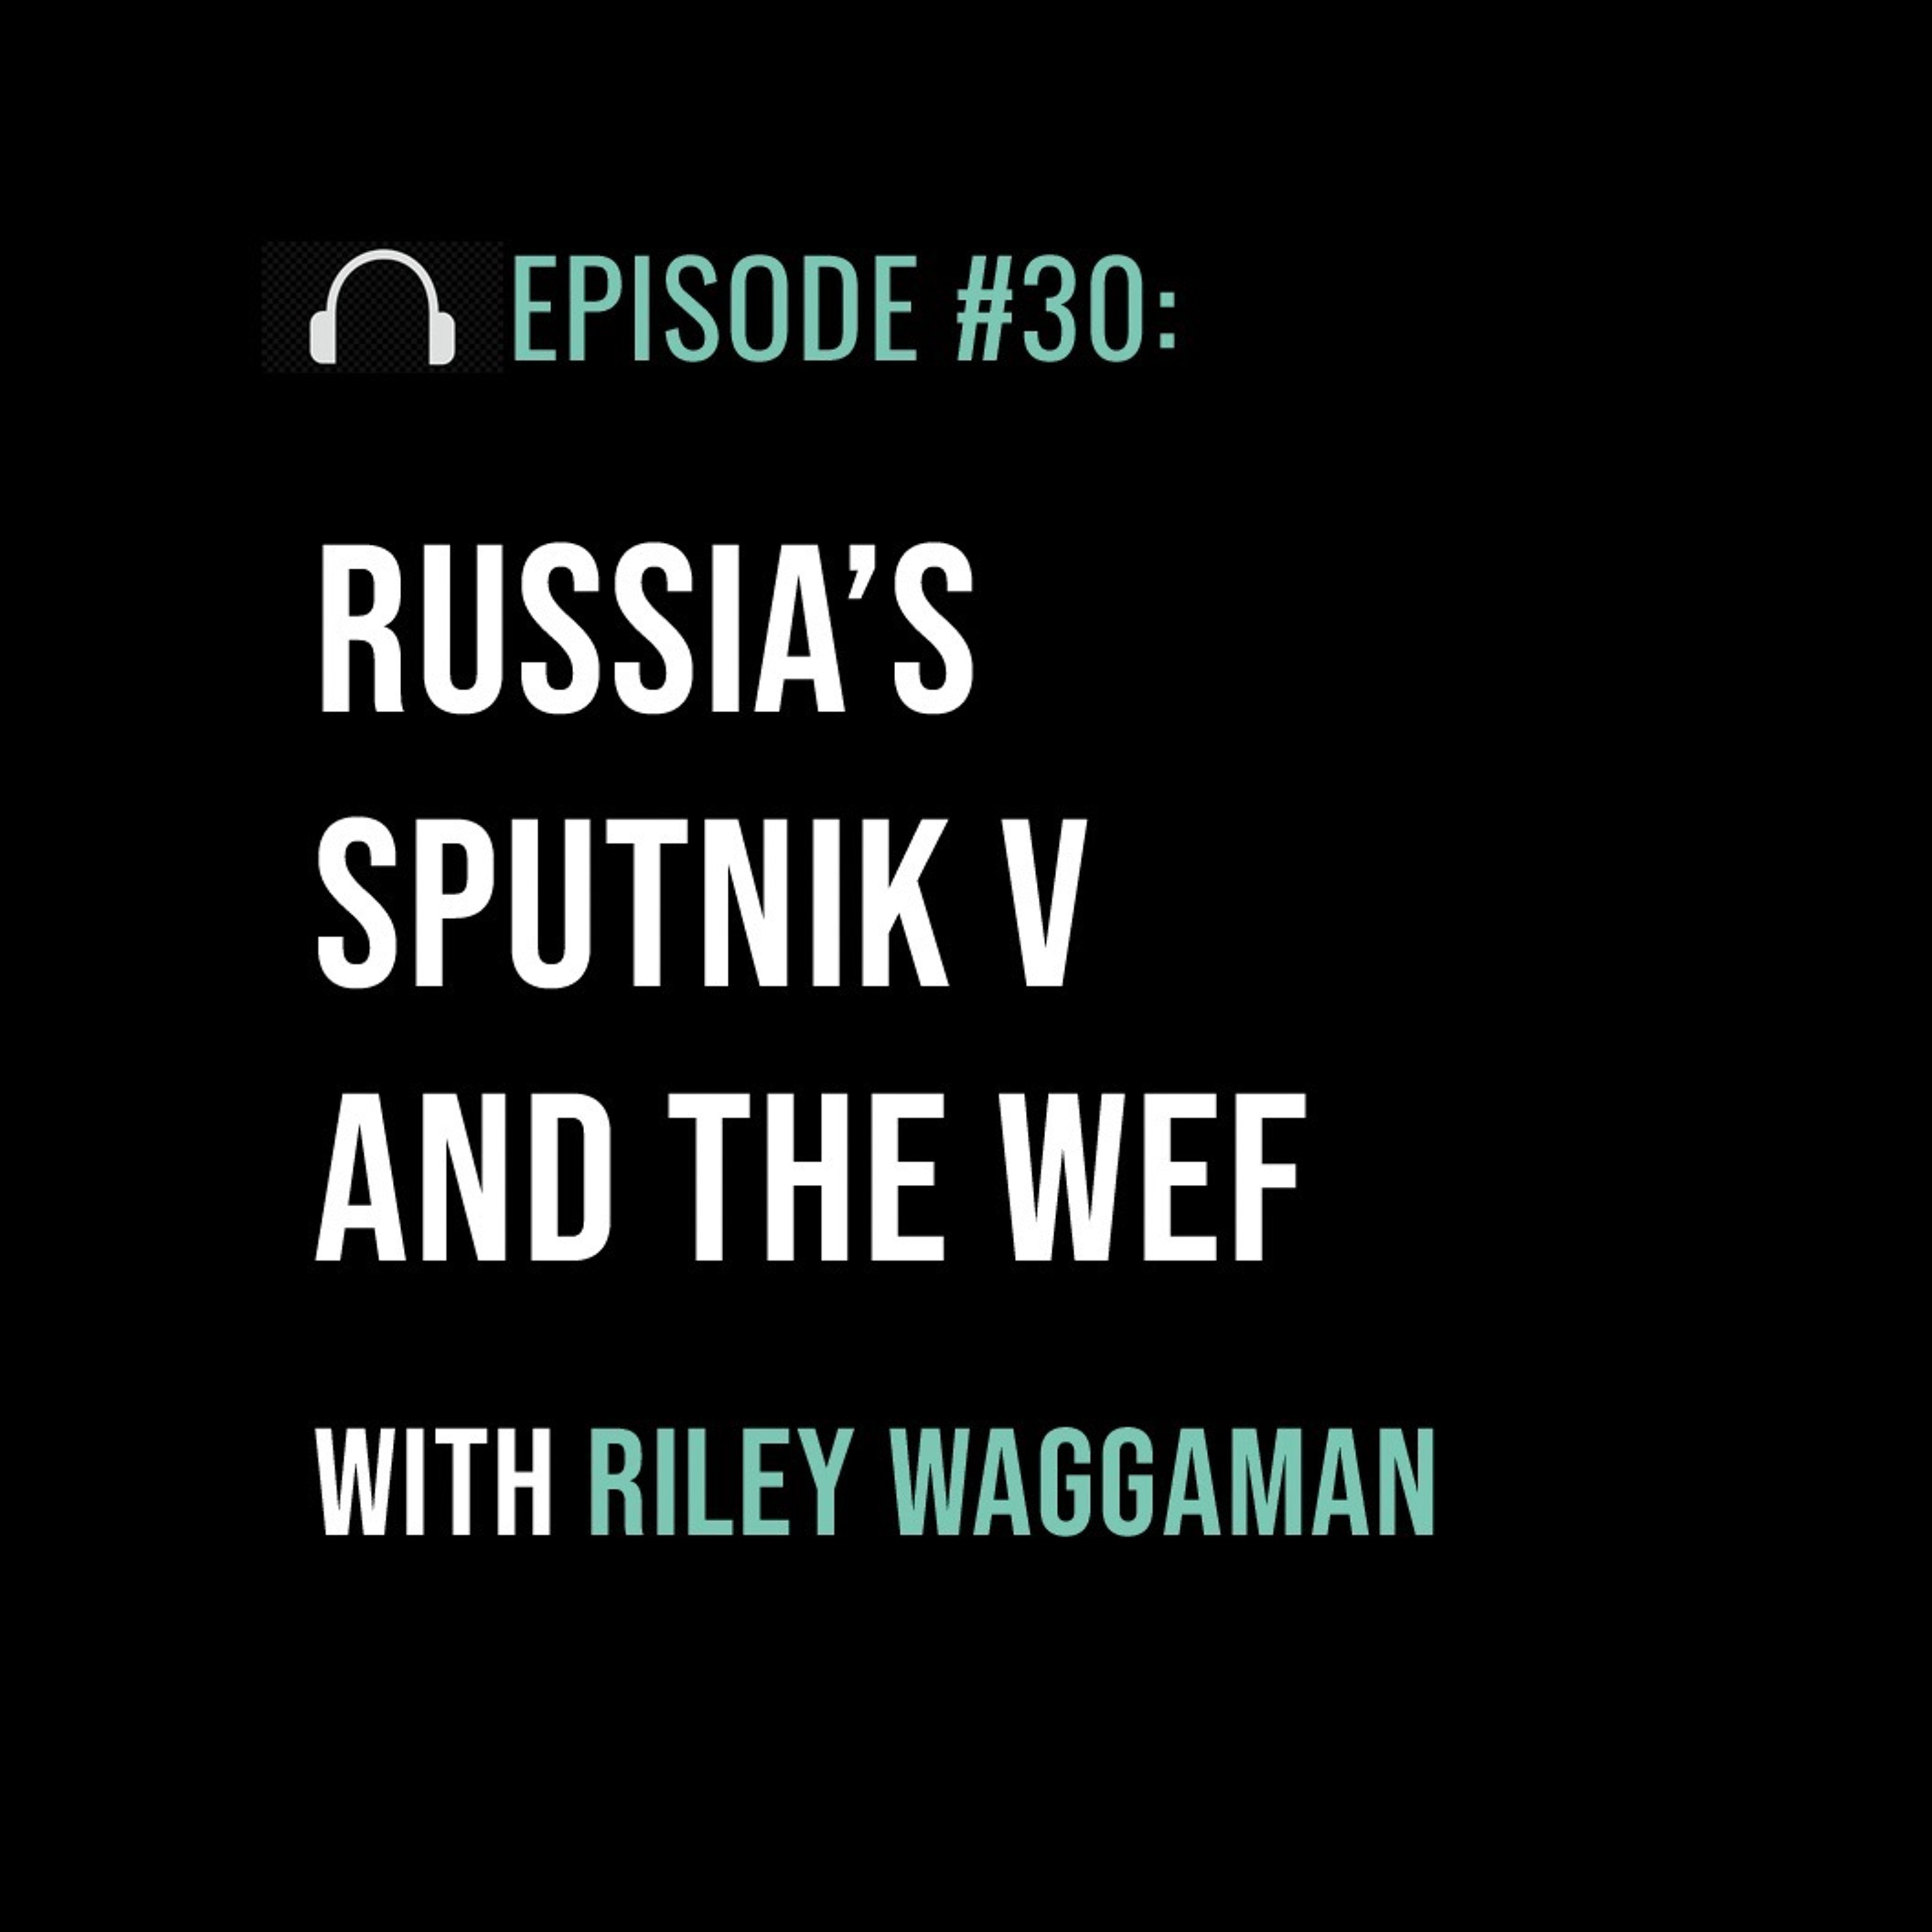 Russia’s Sputnik V and the WEF with Riley Waggaman